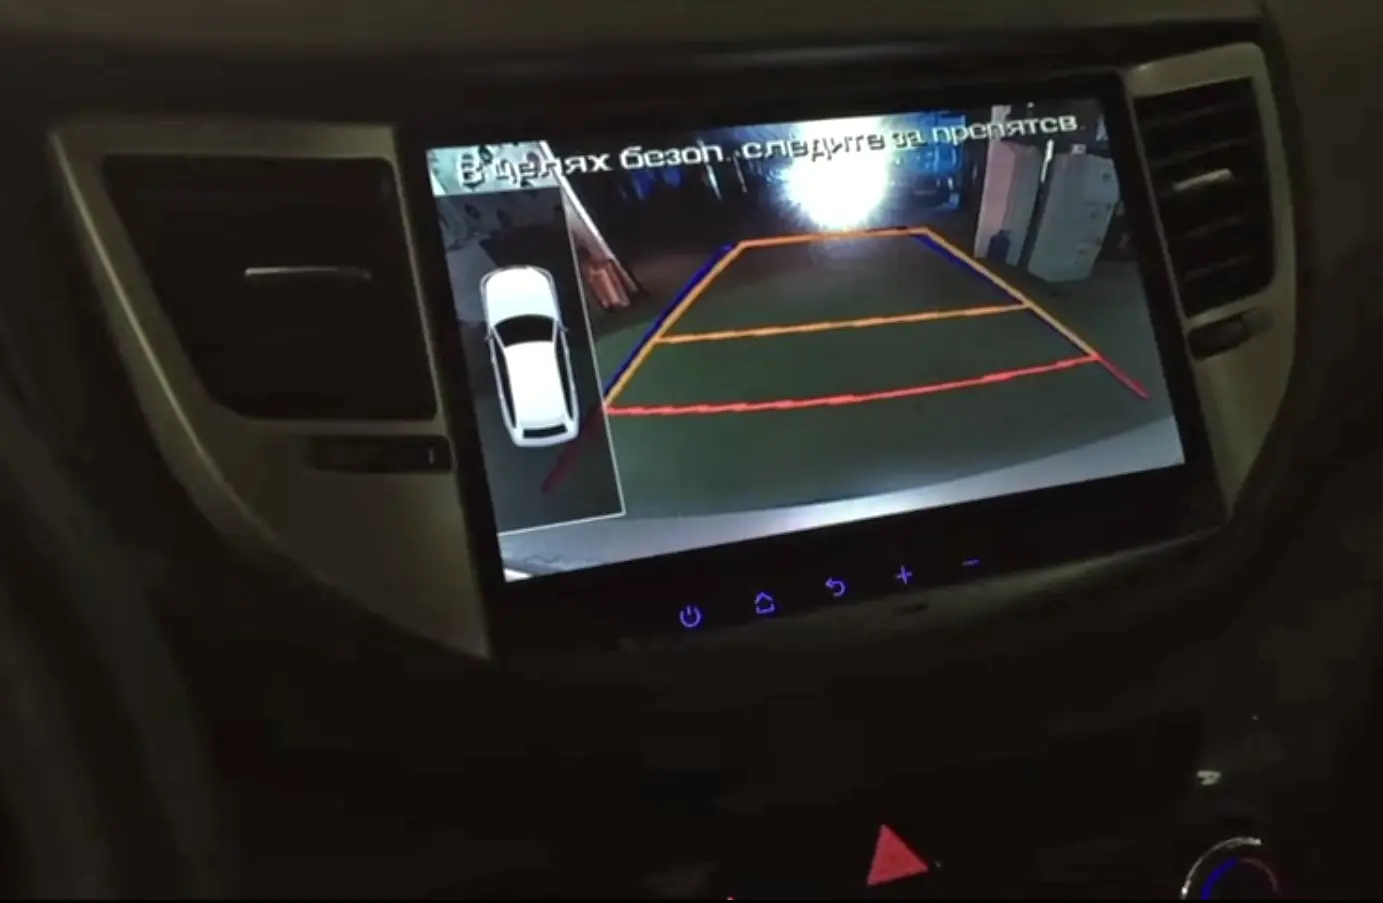 SMARTY Trend supports the factory parking system and rear view camera